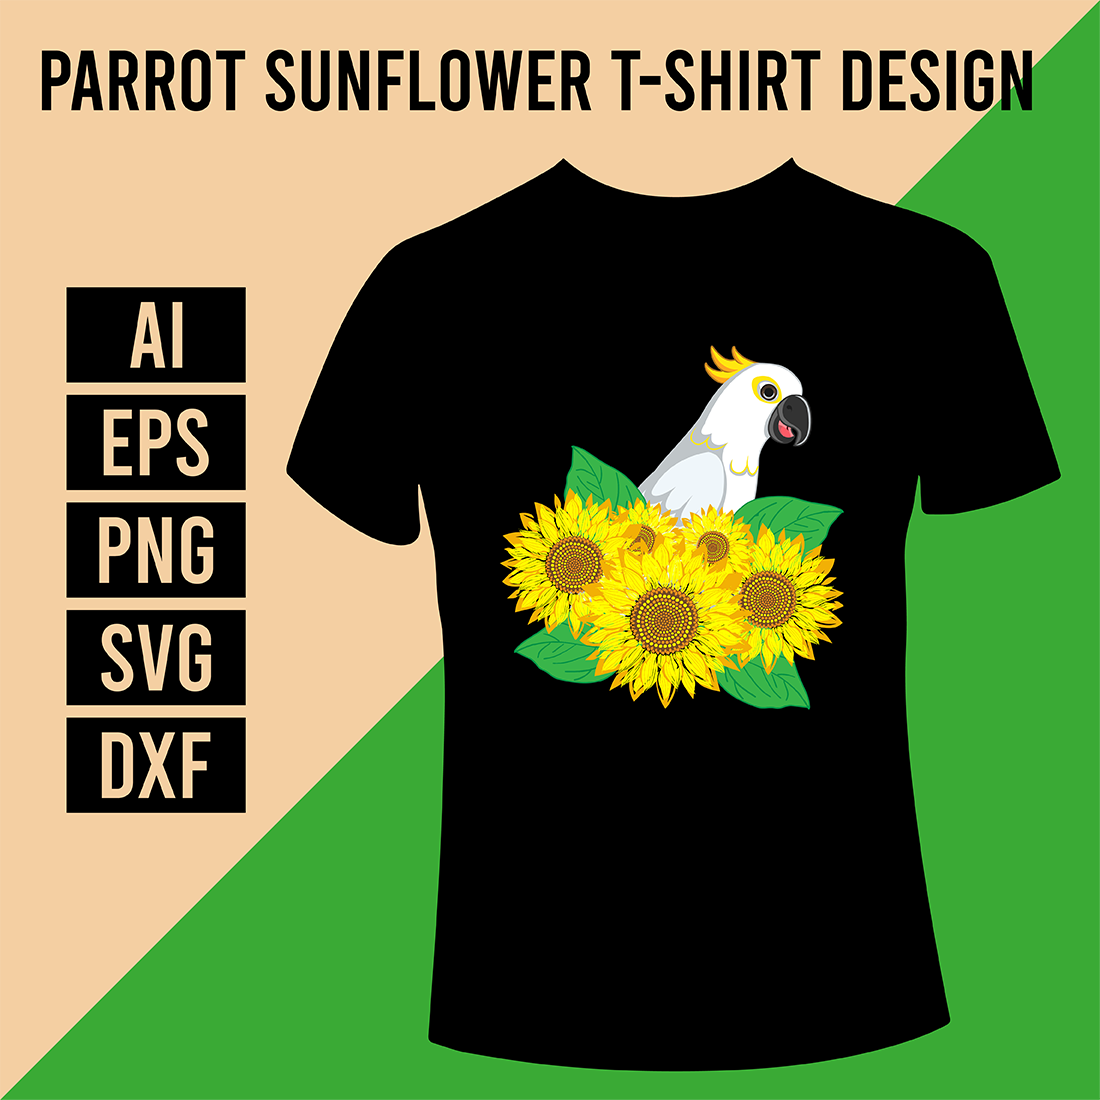 Black shirt with a white parrot and sunflowers on it.